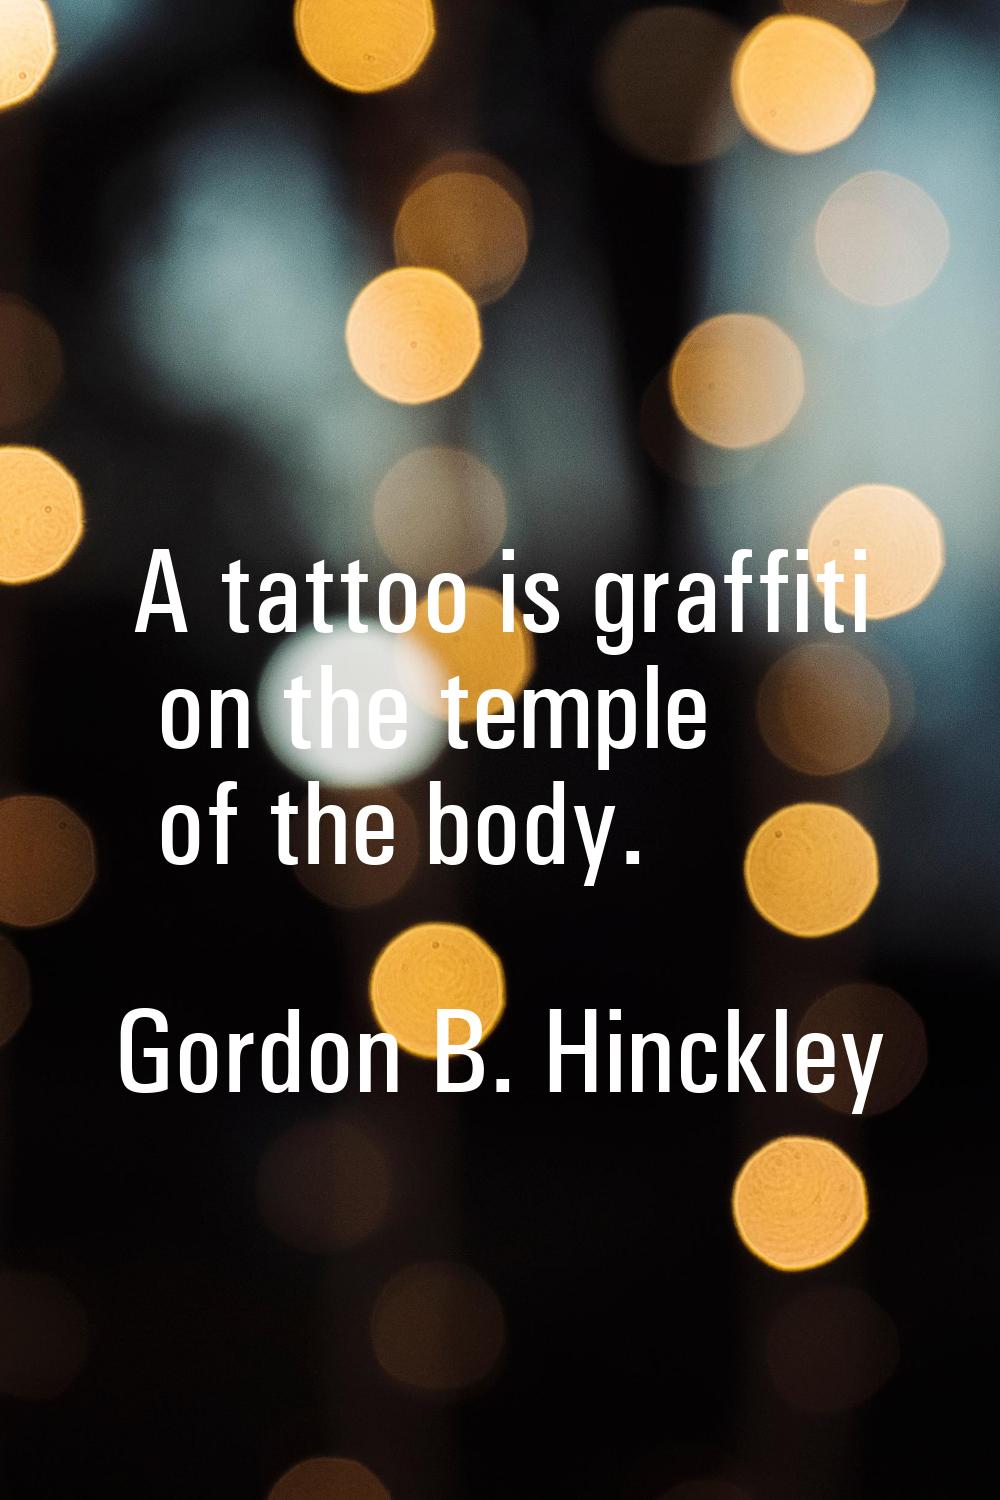 A tattoo is graffiti on the temple of the body.